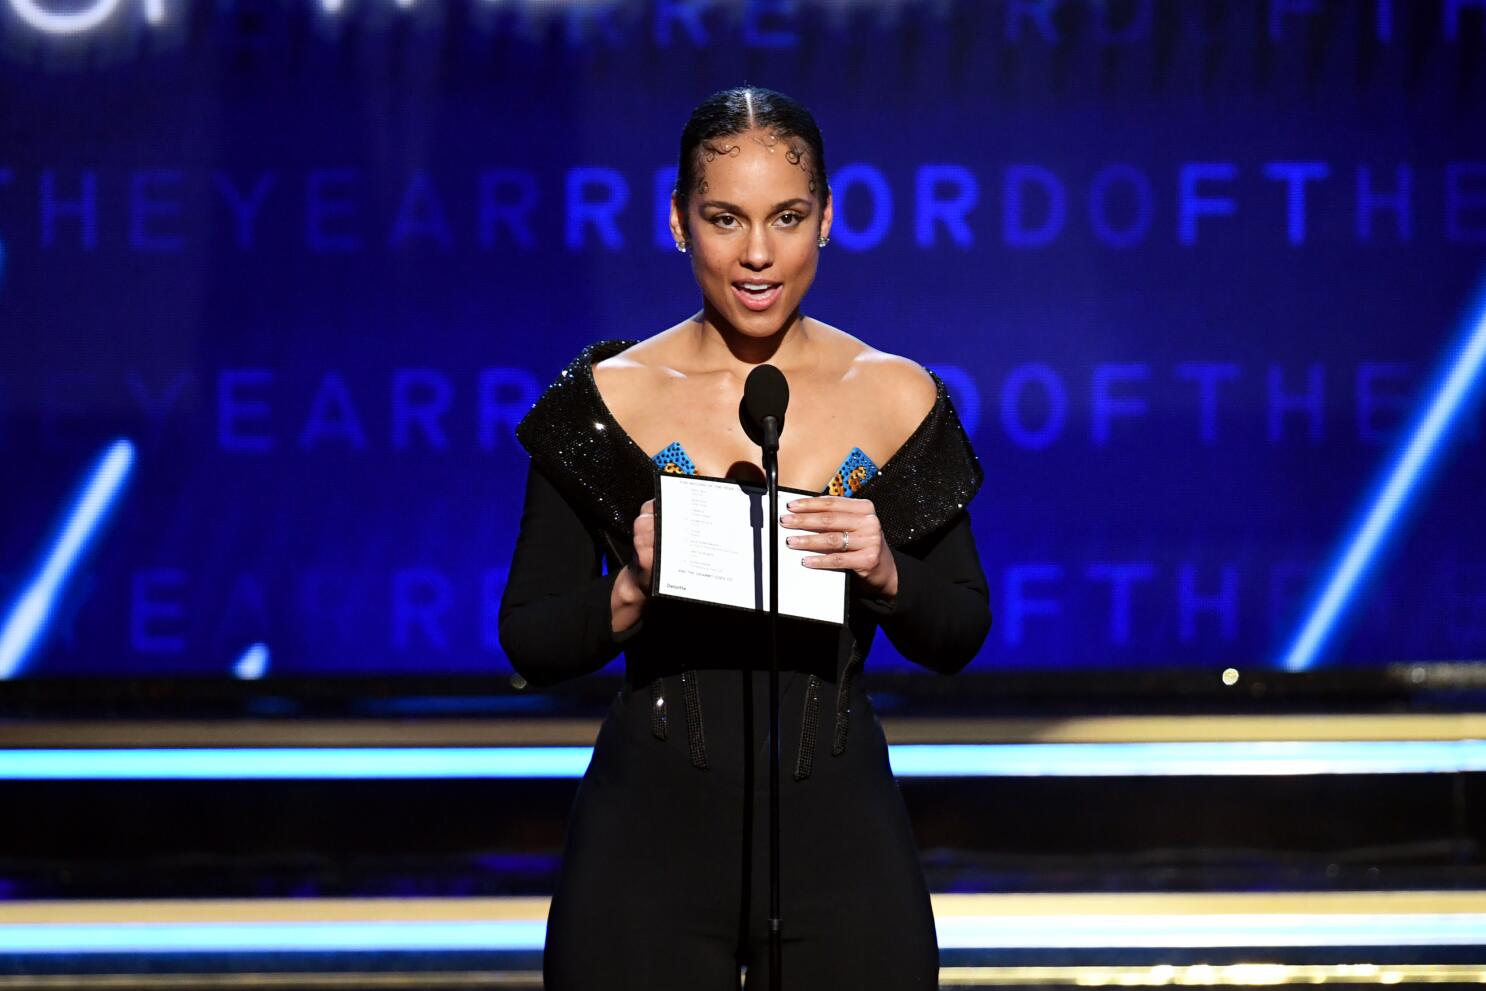 Alicia Keys Announces She Will Host the Grammy Awards - The New York Times